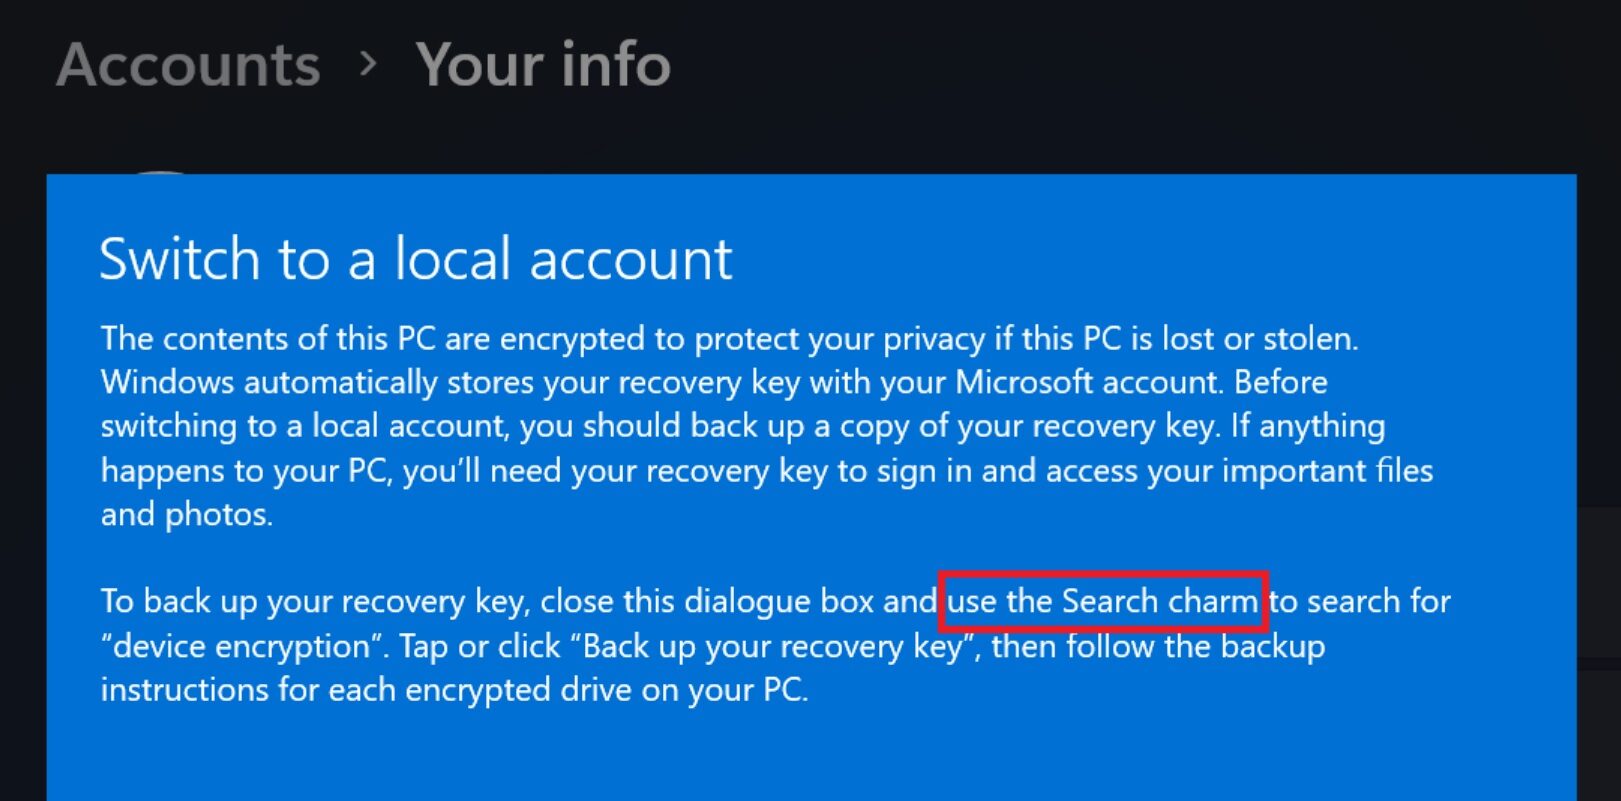 windows-11-mentions-charms-bar-6455301